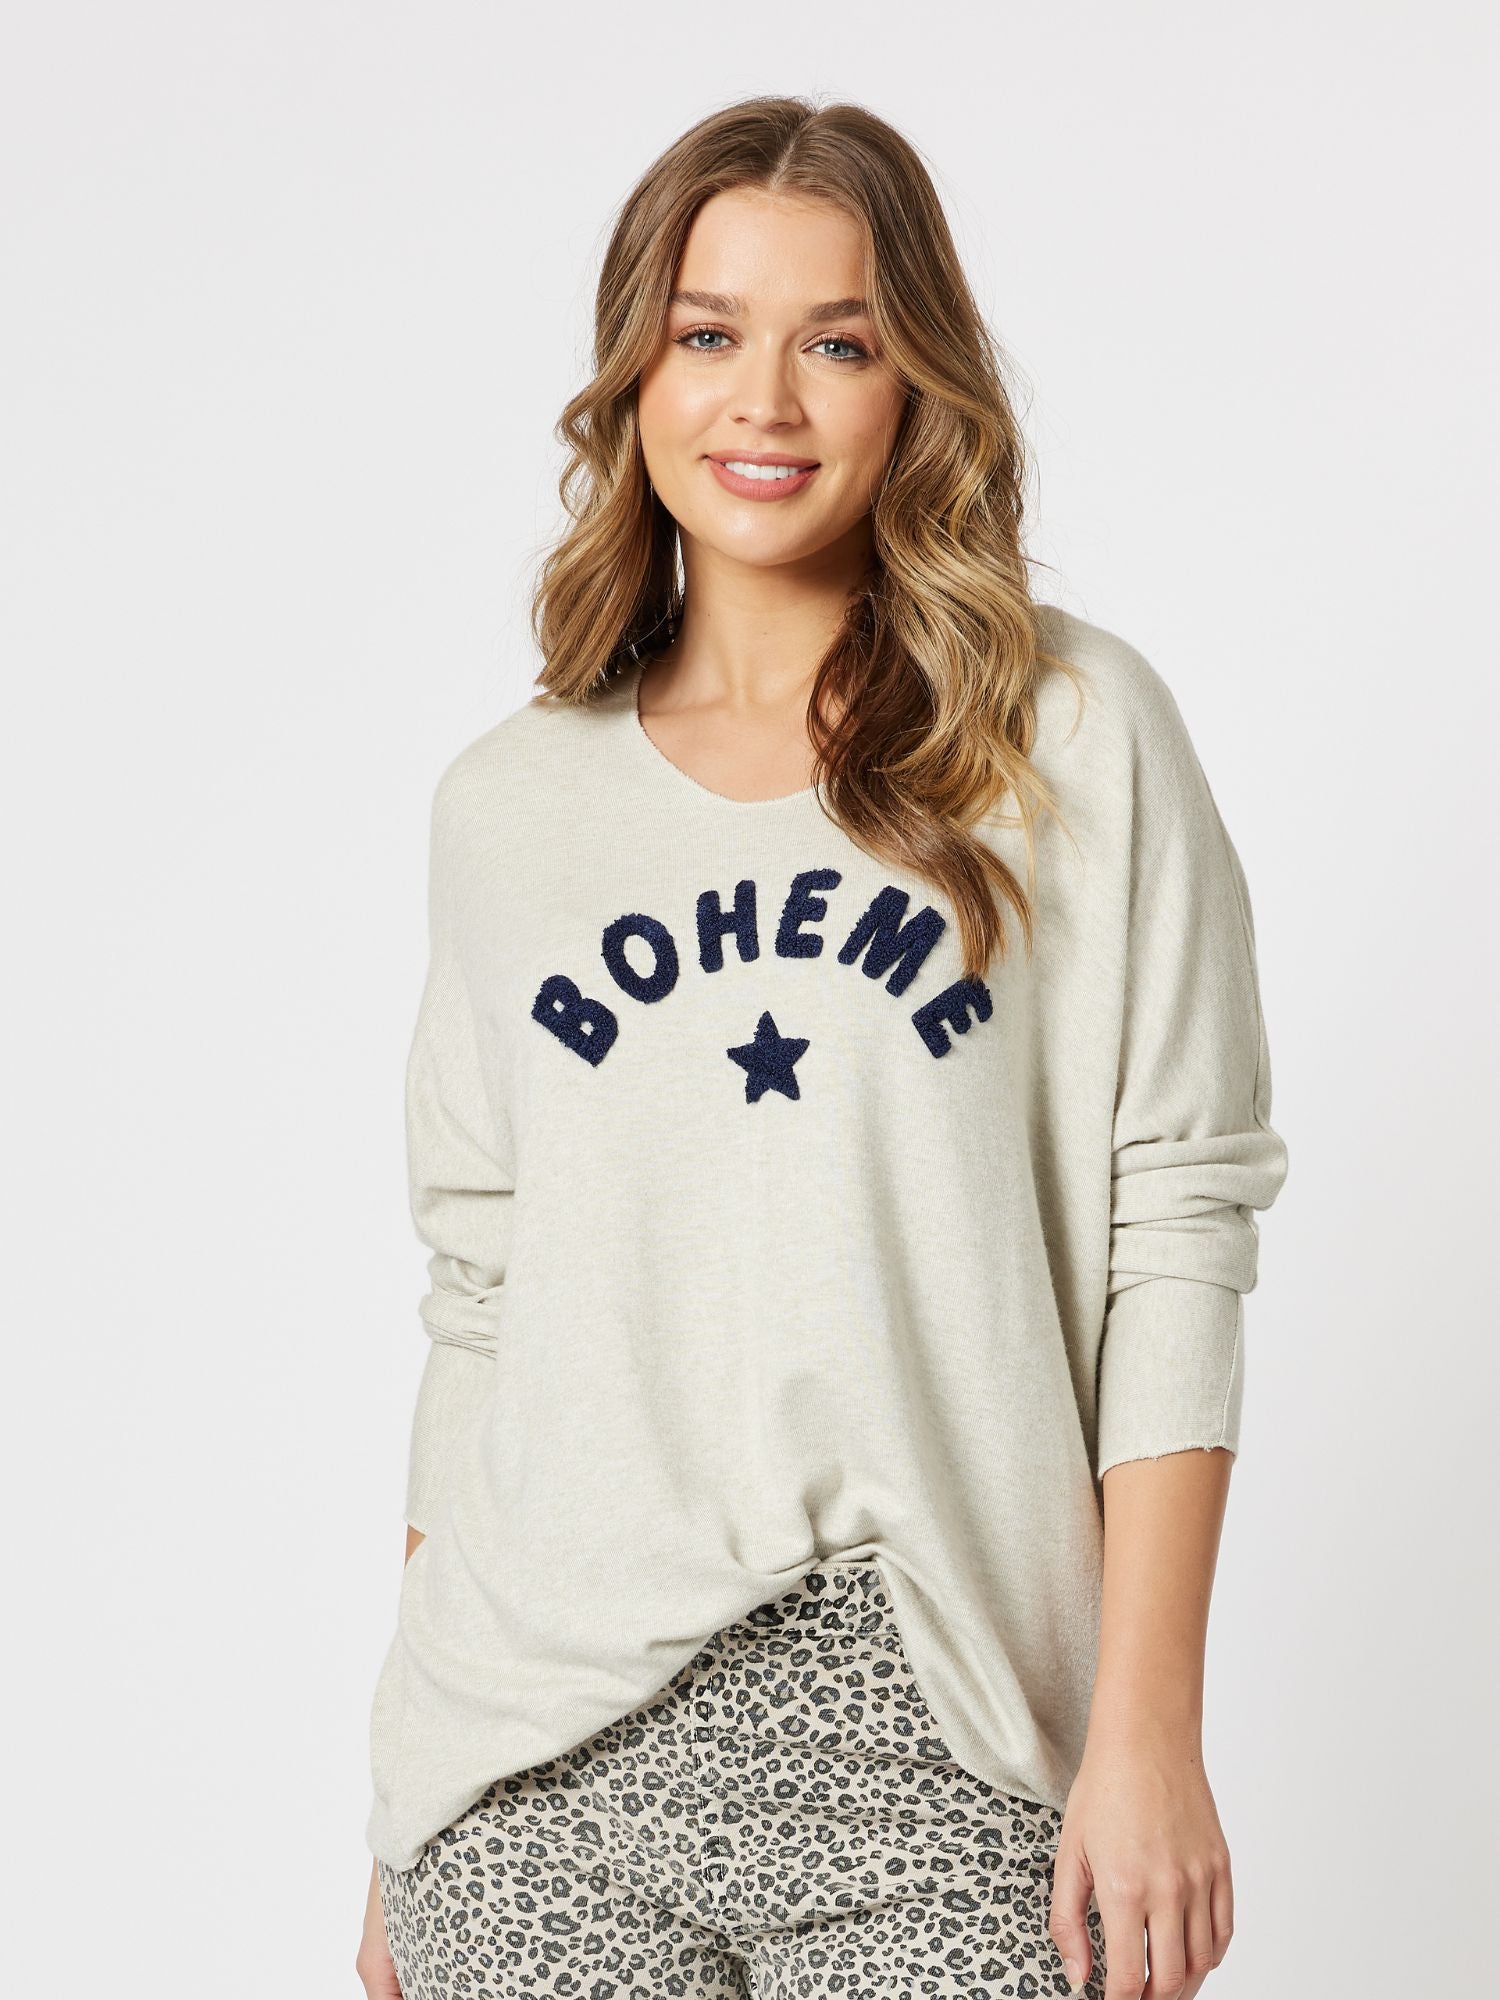 Boheme Relaxed Long Sleeve Knit Top Top - Natural